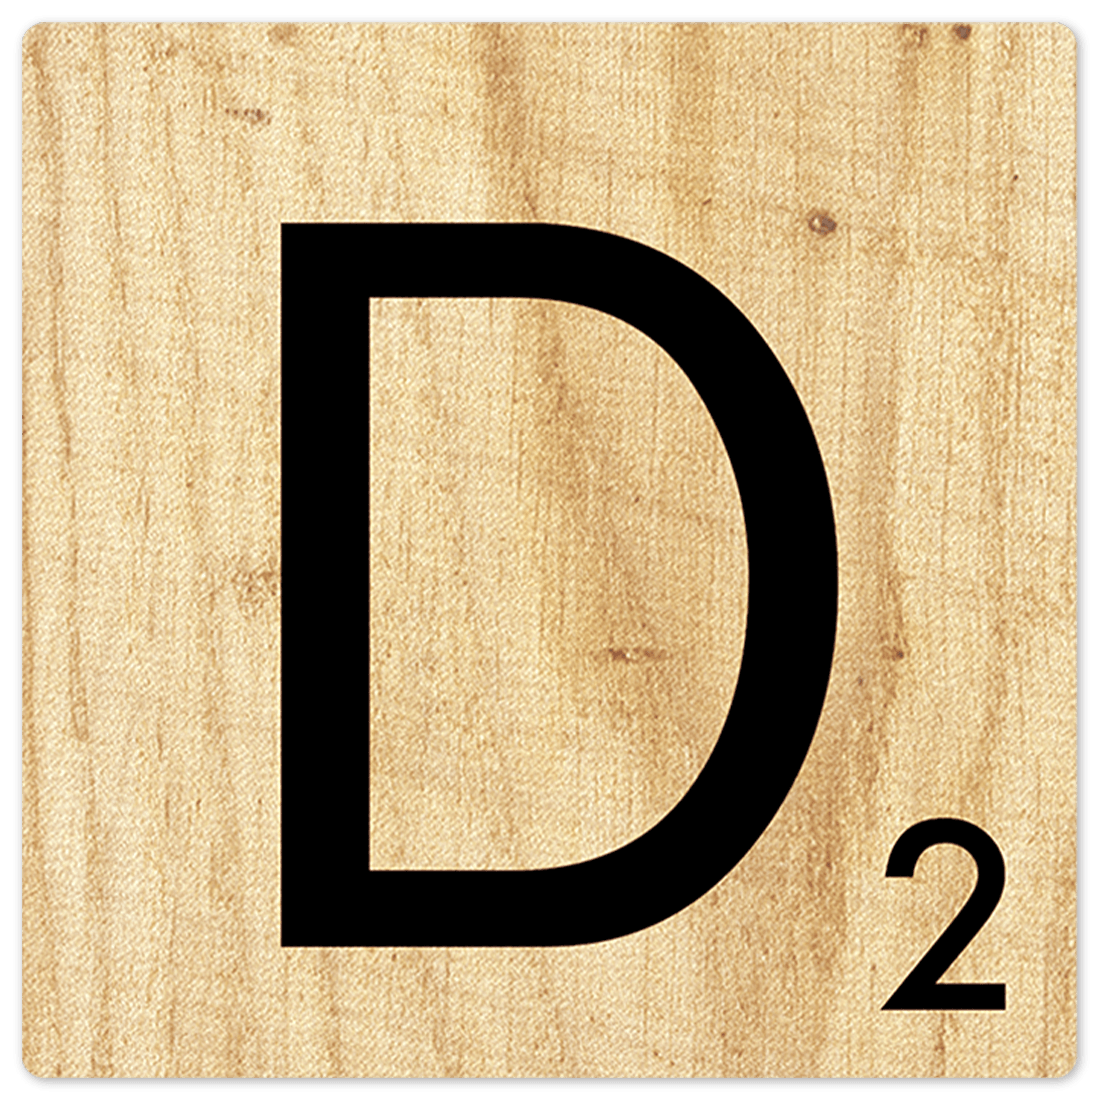 yellow letter d